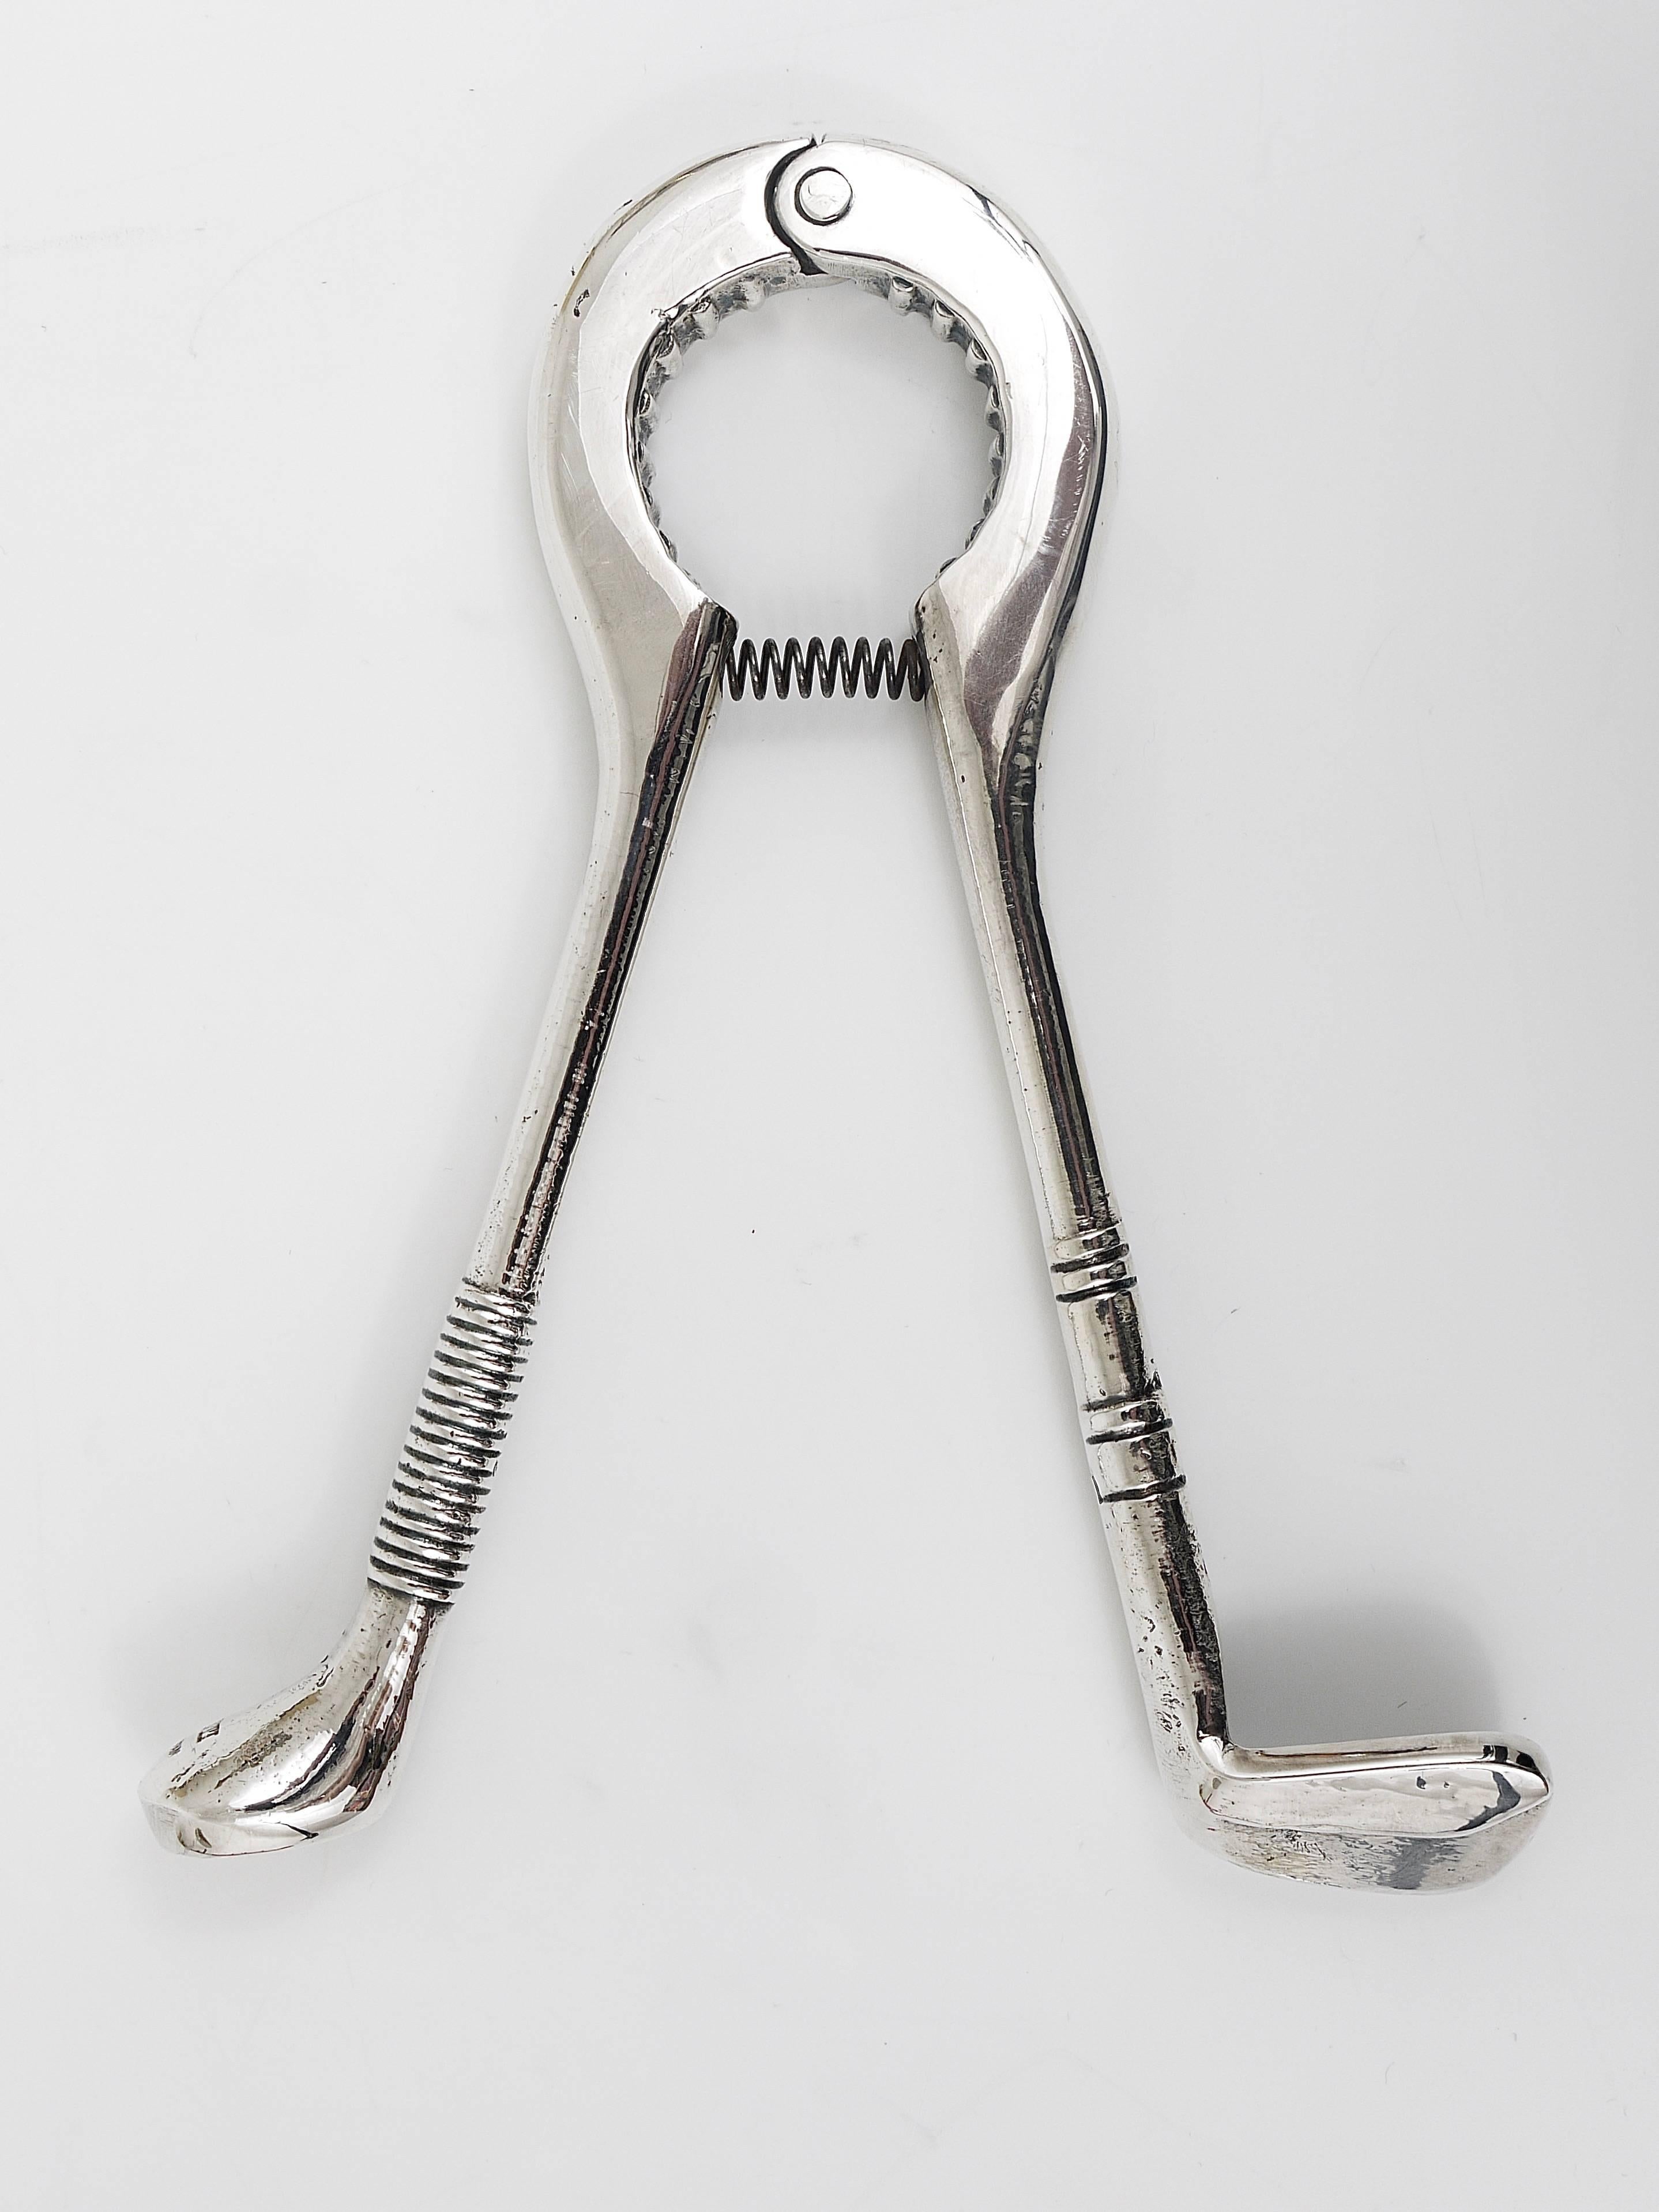 Mid-Century Modern Silver Golf Club Champagne Cork Pliers Bottle Opener by Valenti Spain, 1970s For Sale